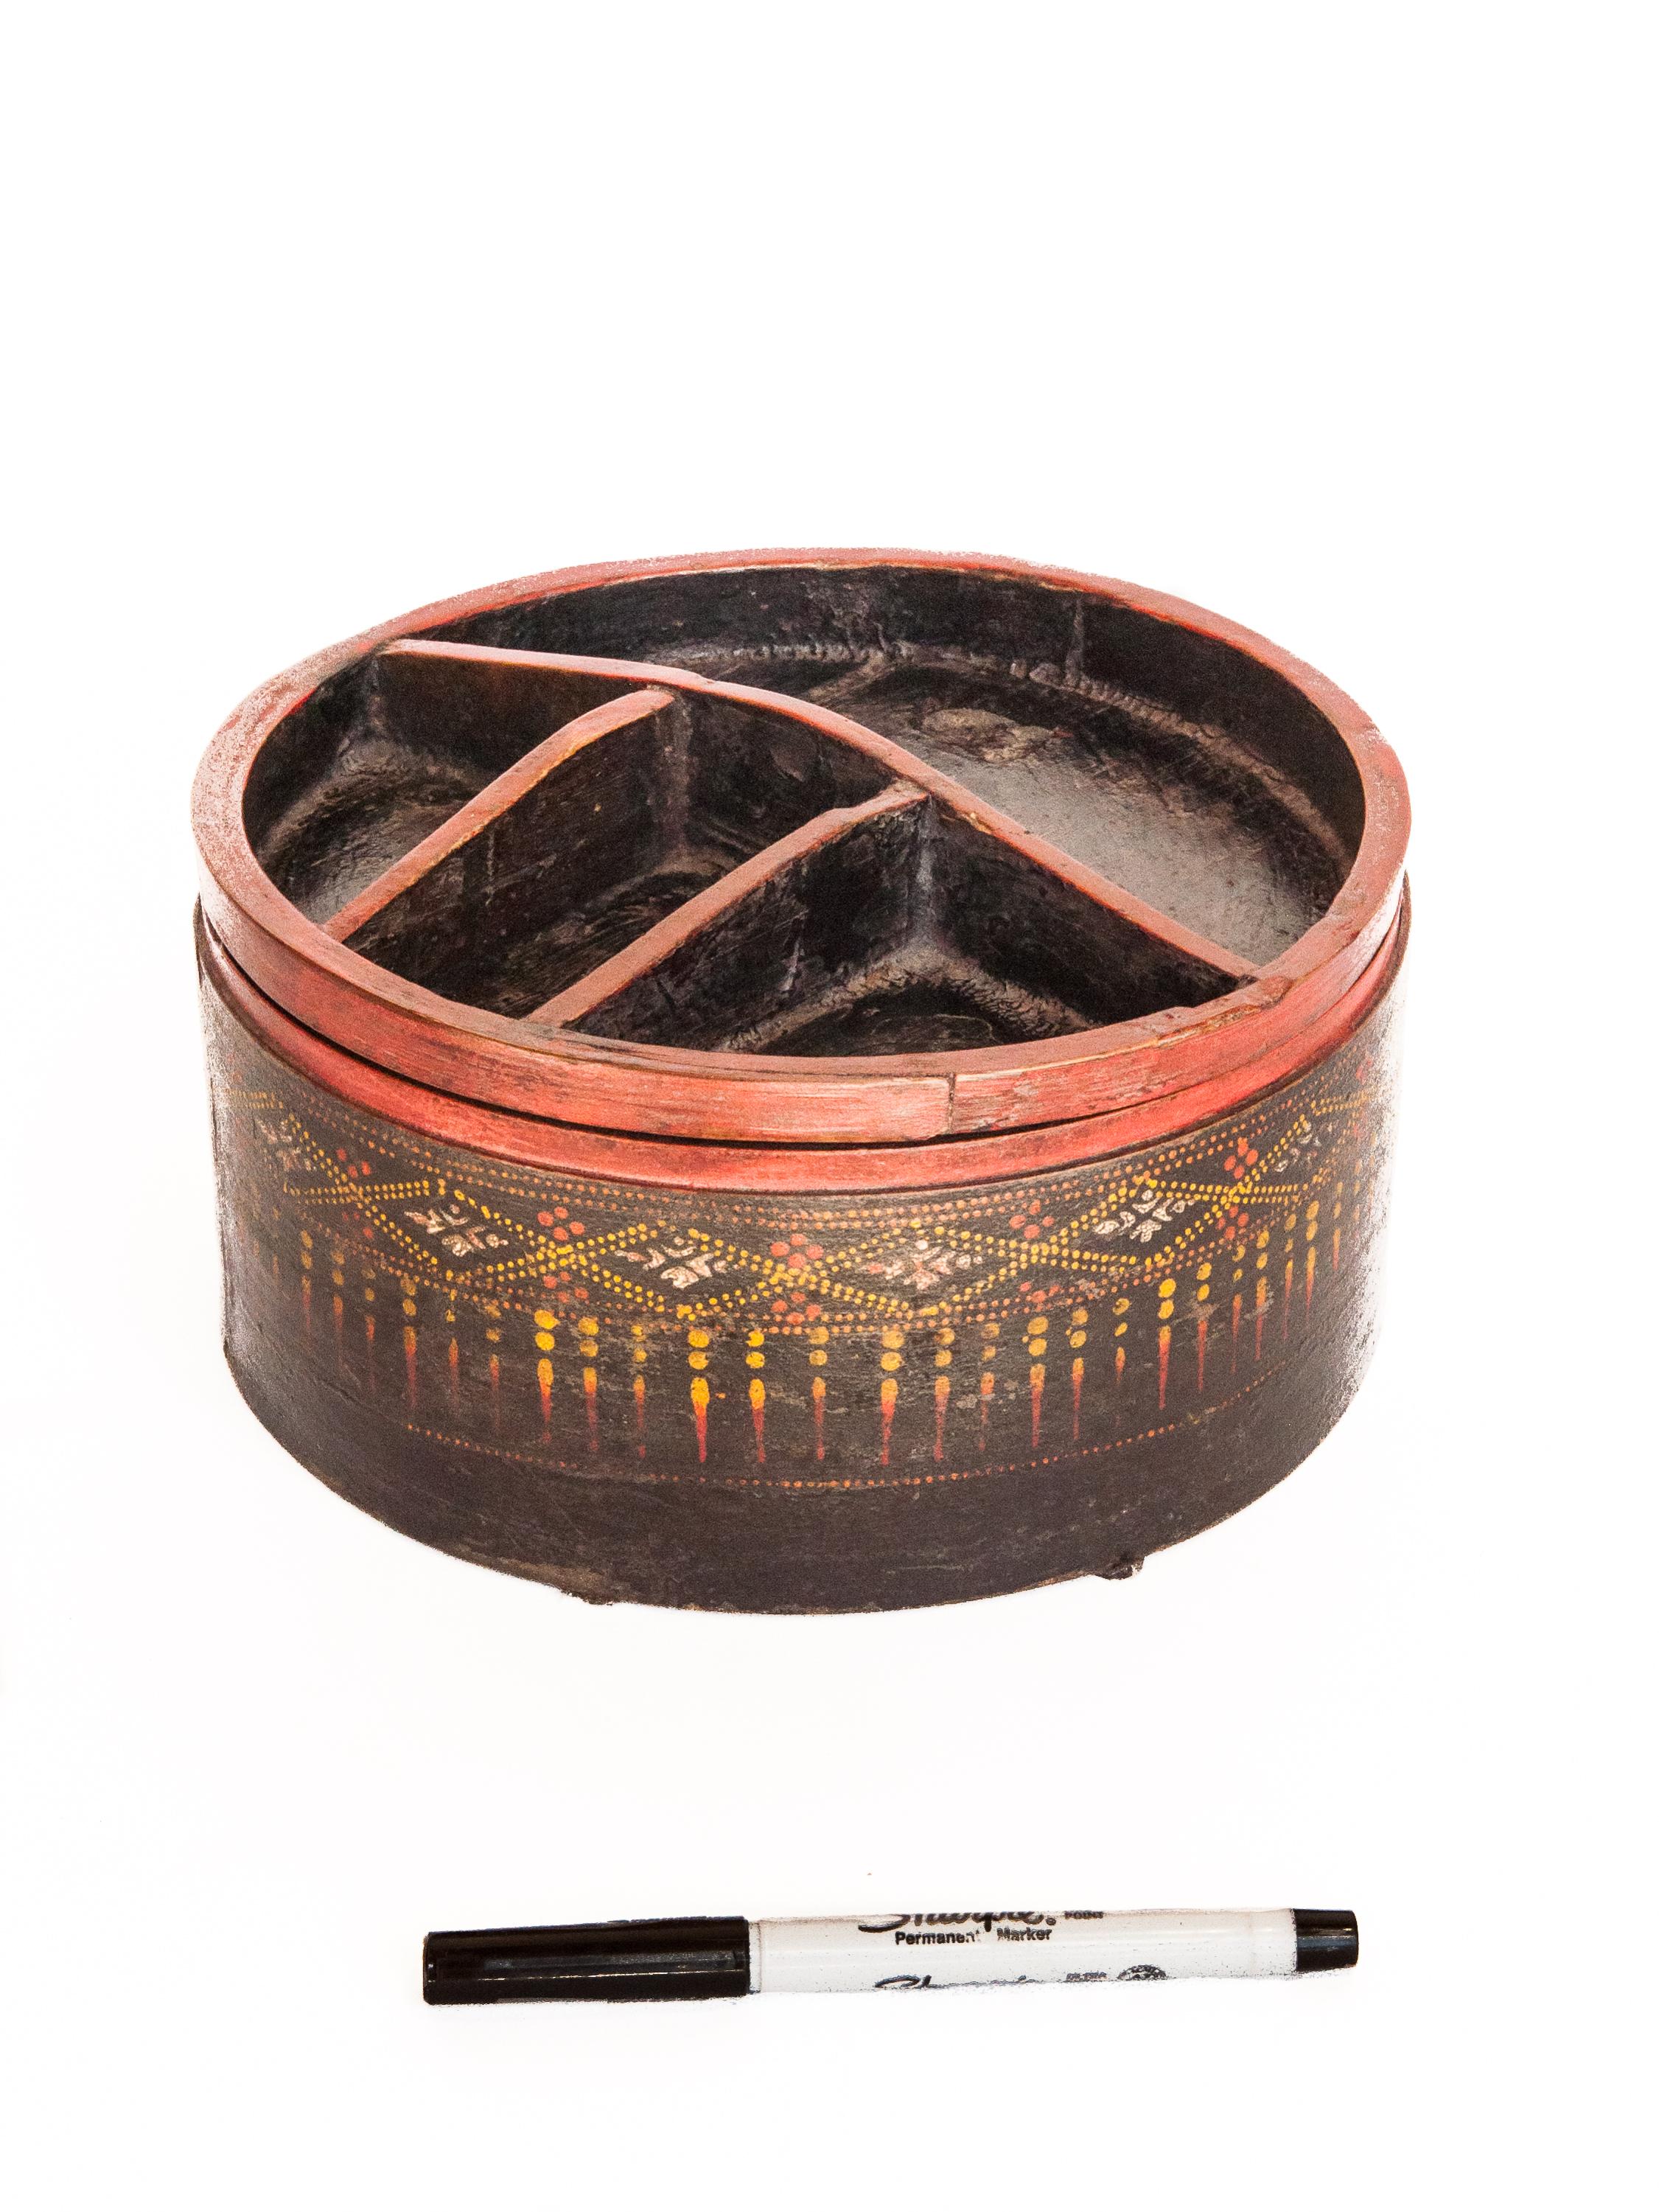 Vintage bamboo betel box/tray. Original color. Cambodia. Early to Mid-20th century.
This old bamboo box was used to hold the condiments and paraphernalia for betel nut chewing. It would be brought out whenever guests came to visit, or when the